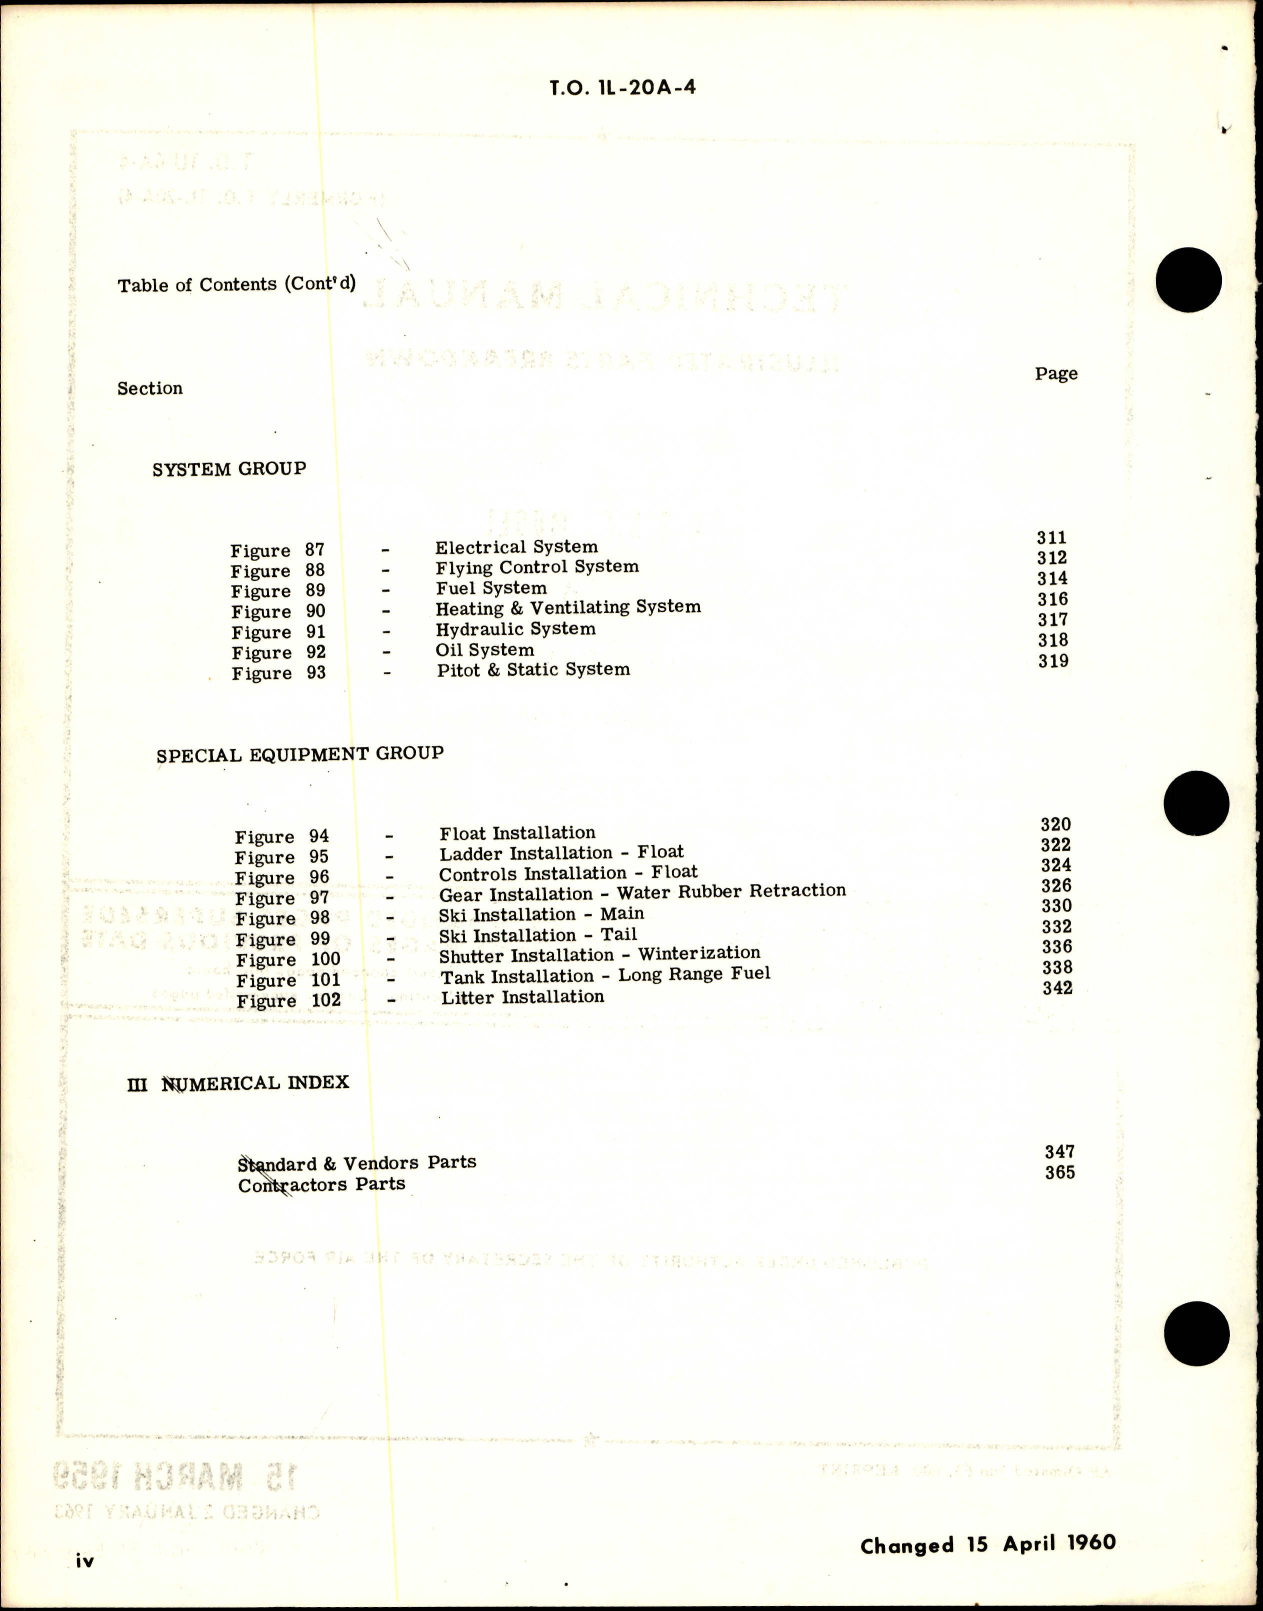 Sample page 6 from AirCorps Library document: Parts Catalog for L-20A 